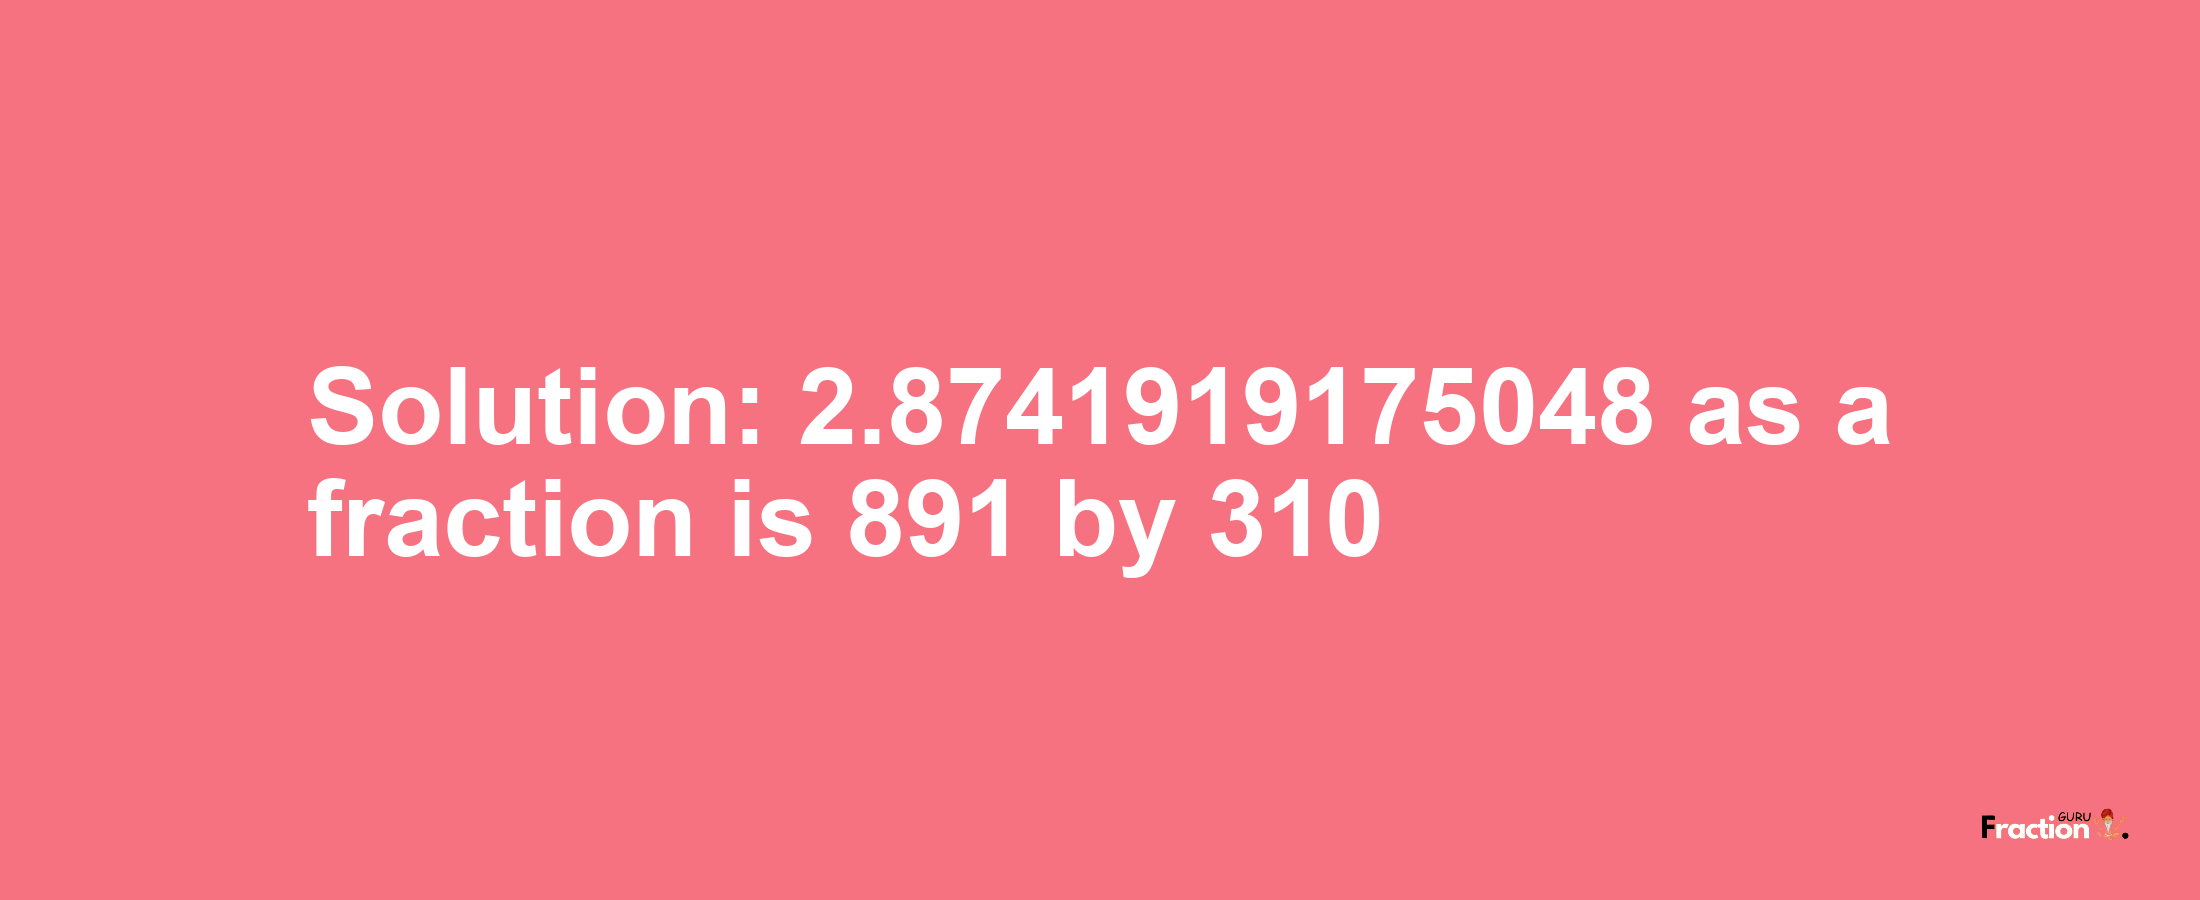 Solution:2.8741919175048 as a fraction is 891/310